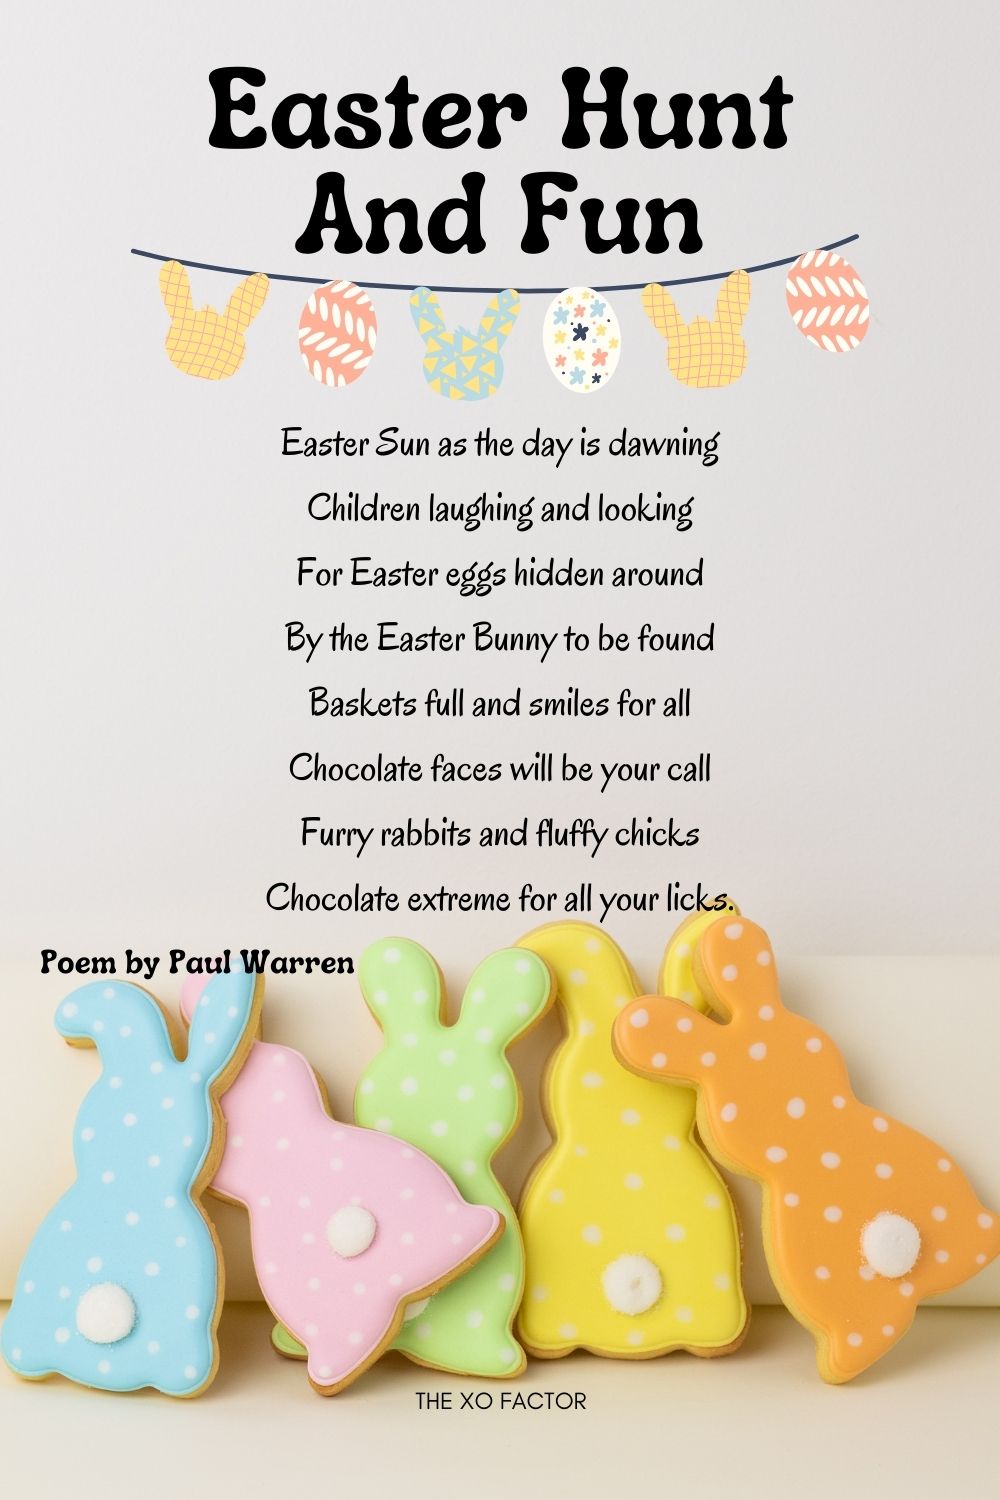 Easter Hunt And Fun Poem by Paul Warren